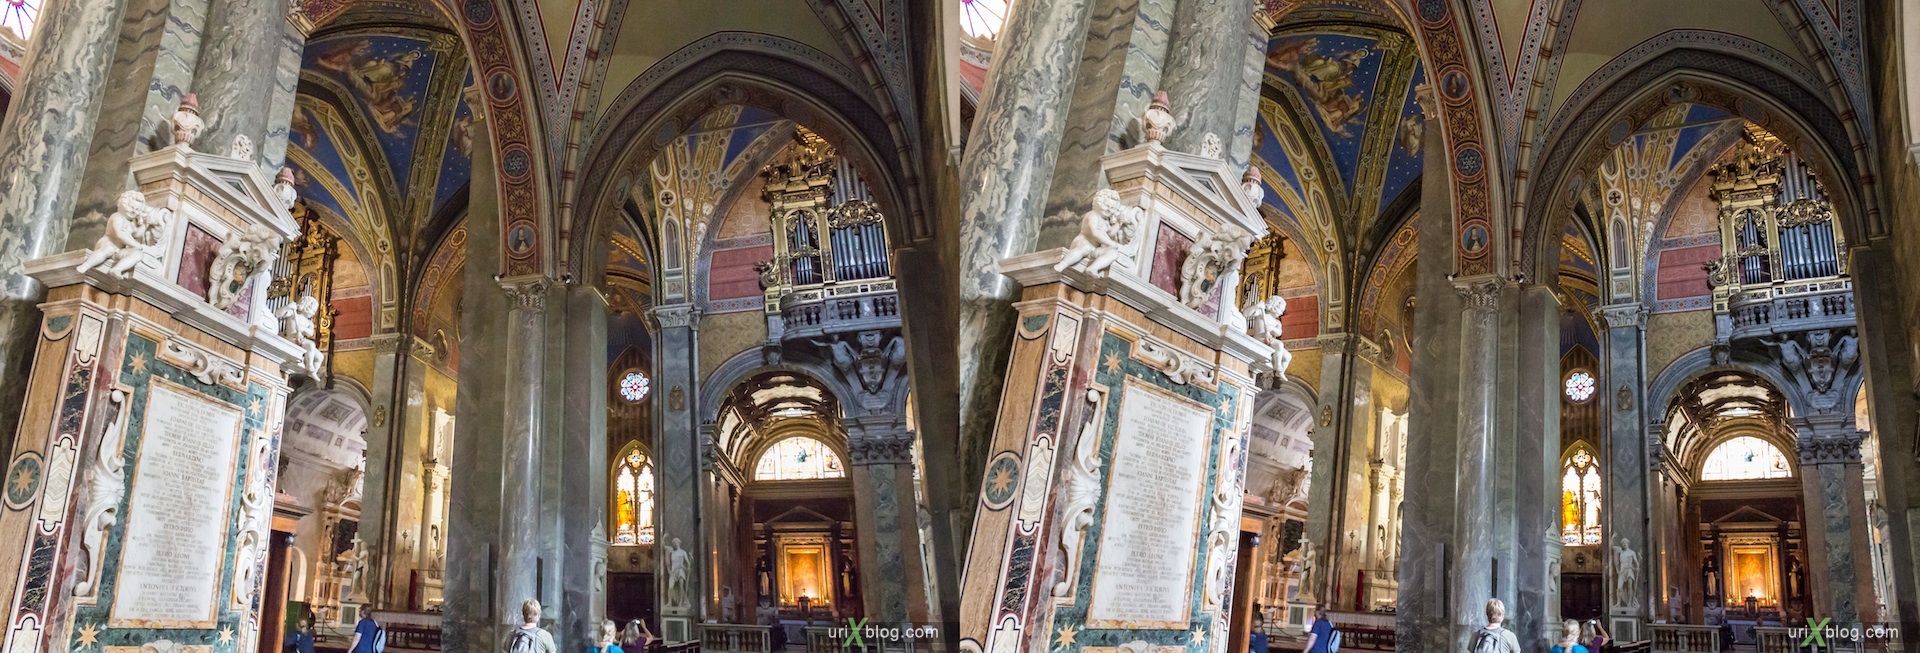 2012, church of Santa Maria sopra Minerva, Rome, Italy, cathedral, monastery, Christianity, Catholicism, 3D, stereo pair, cross-eyed, crossview, cross view stereo pair